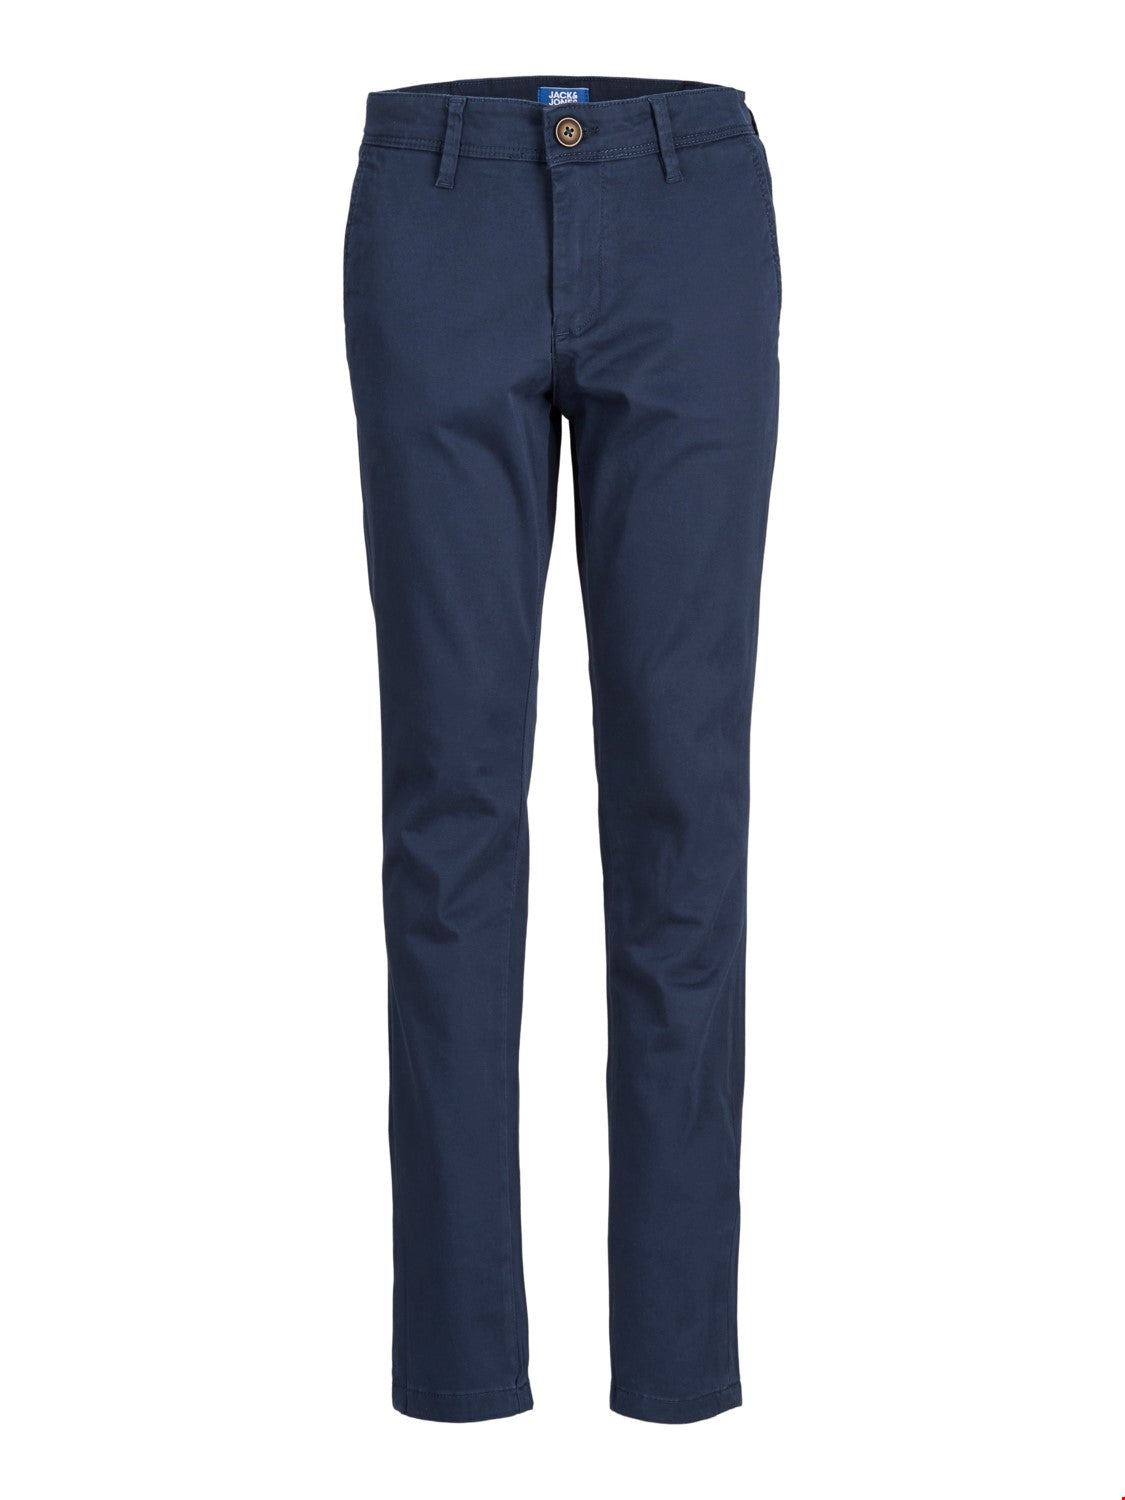 Marco Bowie Junior Navy Chino - Spirit Clothing